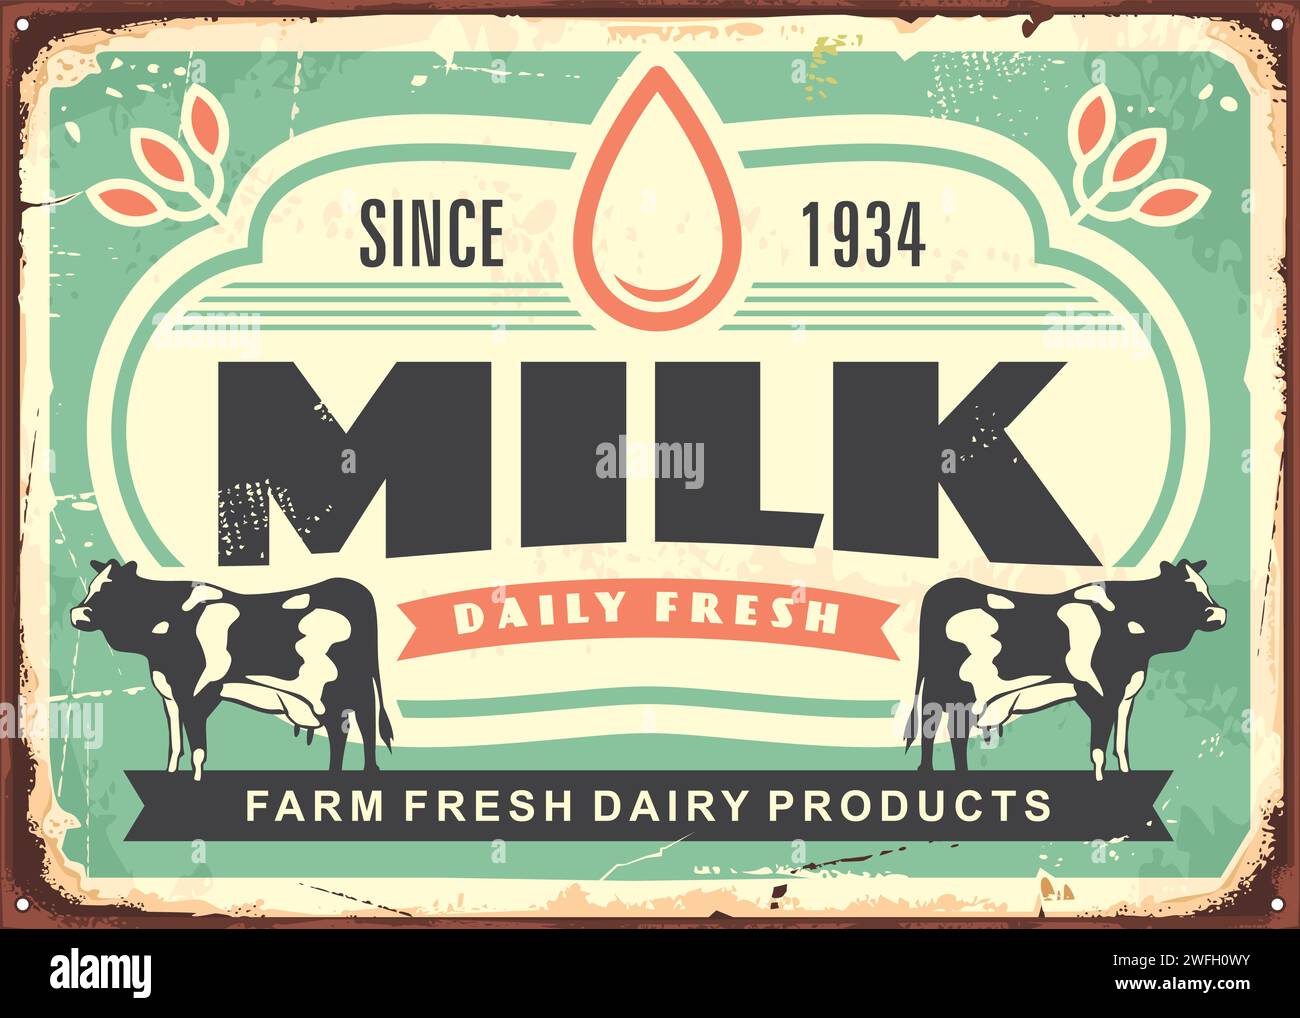 Milk farm fresh dairy products advertisement. Food and drink retro metal sign with cow graphics and creative inscription. Vintage milk vector poster. Stock Vector